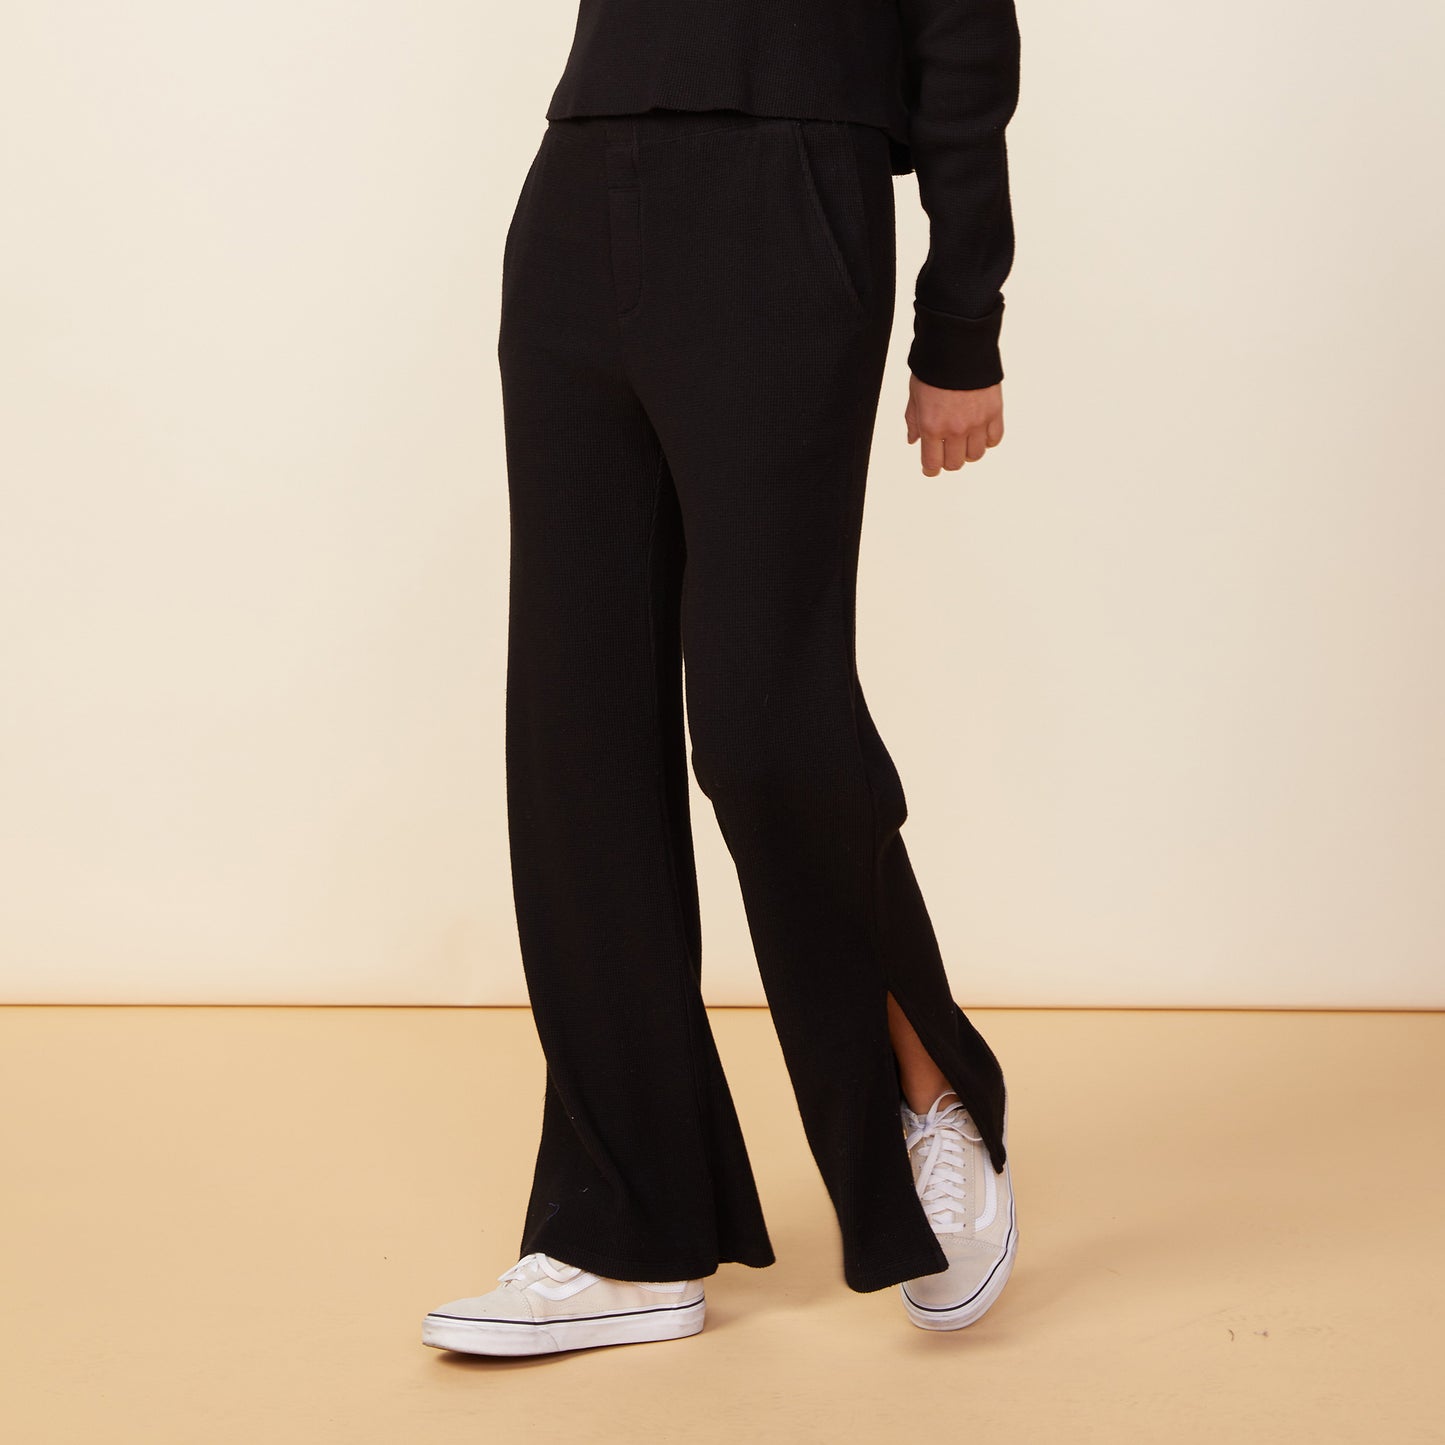 Front view of model wearing the thermal pants in black.